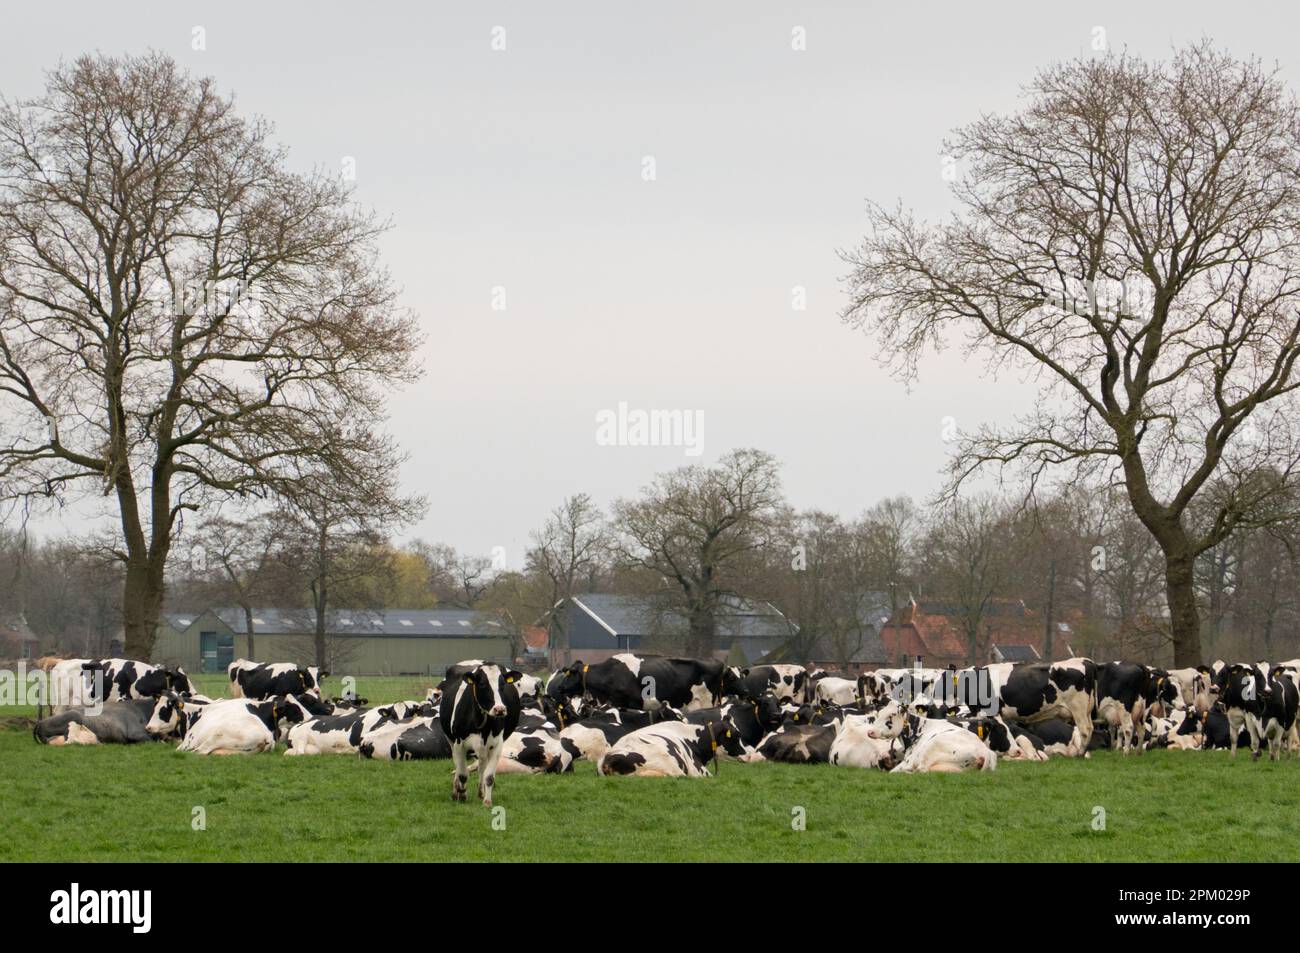 Large herd of black and white dairy cattle in a meadow Stock Photo